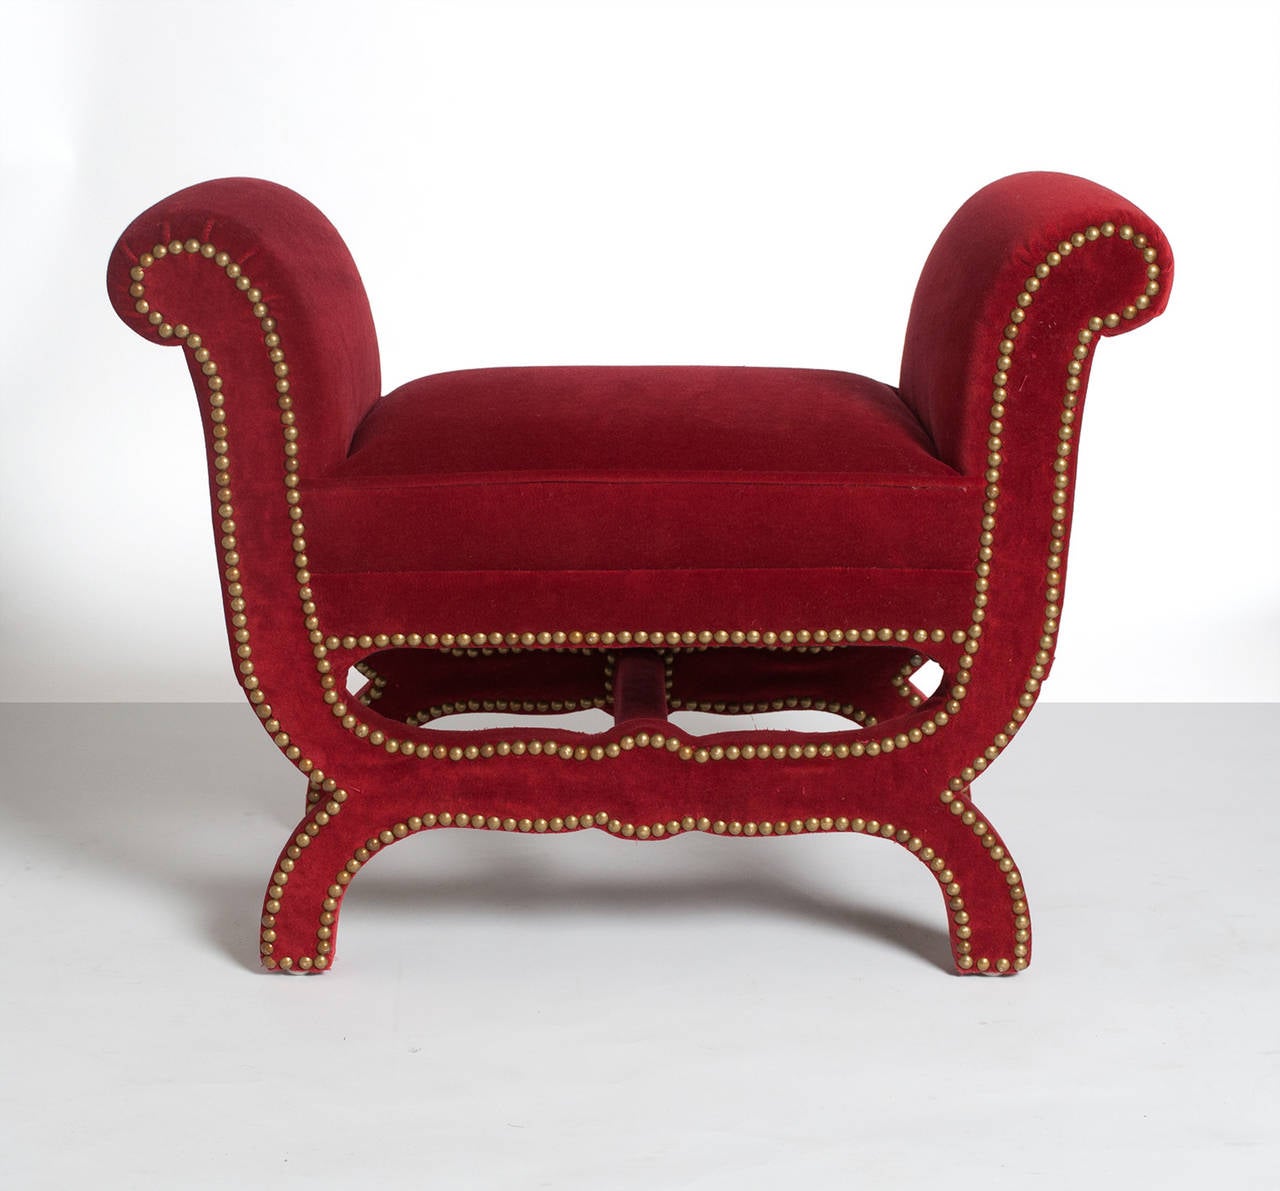 Swedish art deco footstool by Otto Schulz for Boet with scrolled design. Newly upholstered with red velvet upholstery and detailed with brass nailheads. Length: 25.5